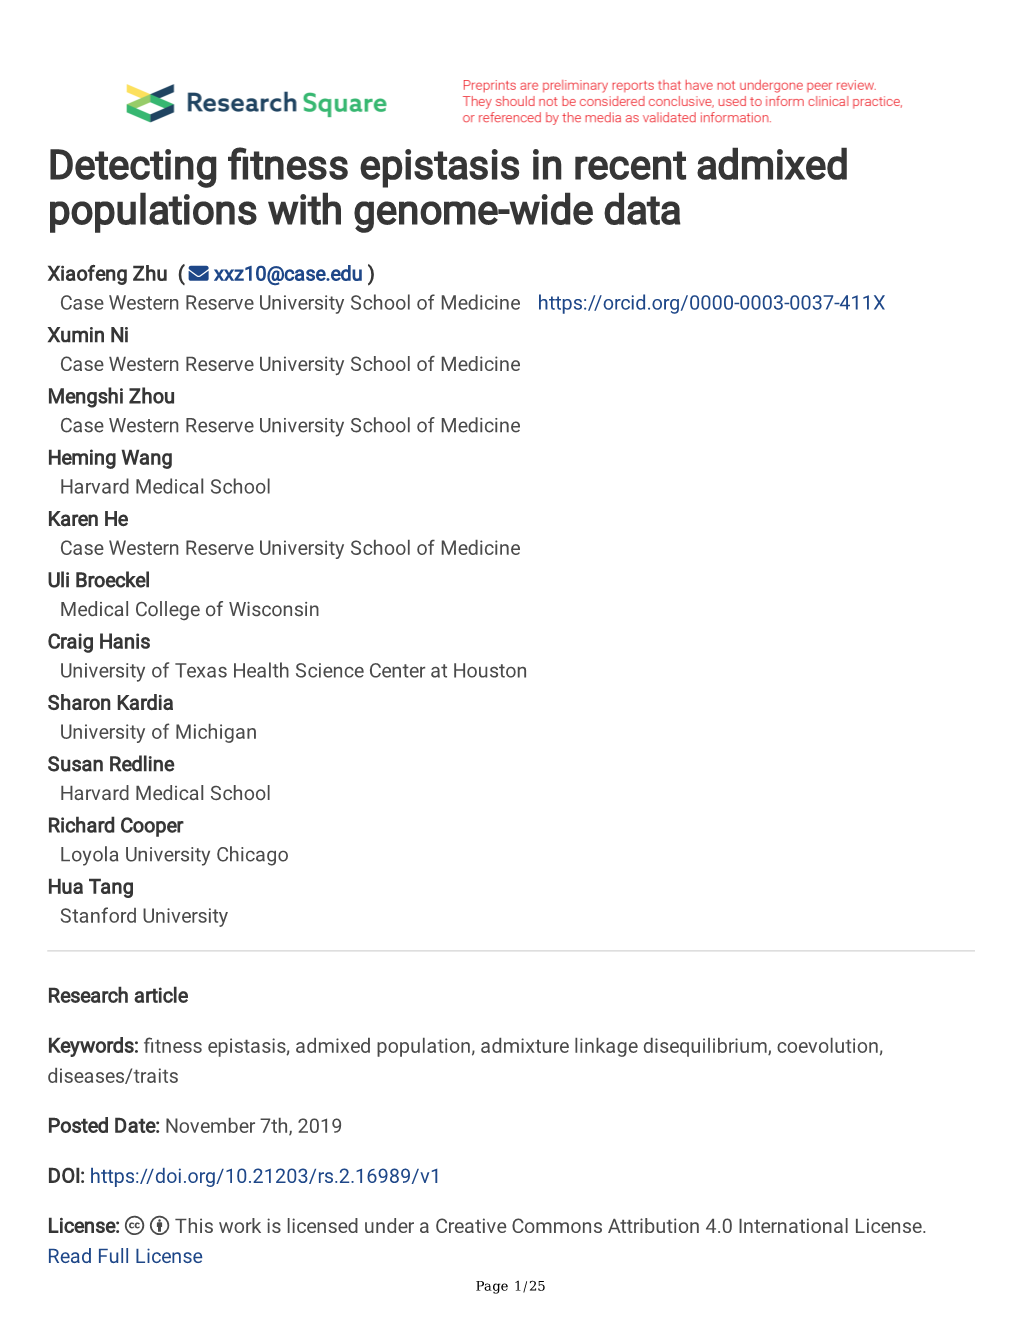 Detecting Fitness Epistasis in Recent Admixed Populations with Genome